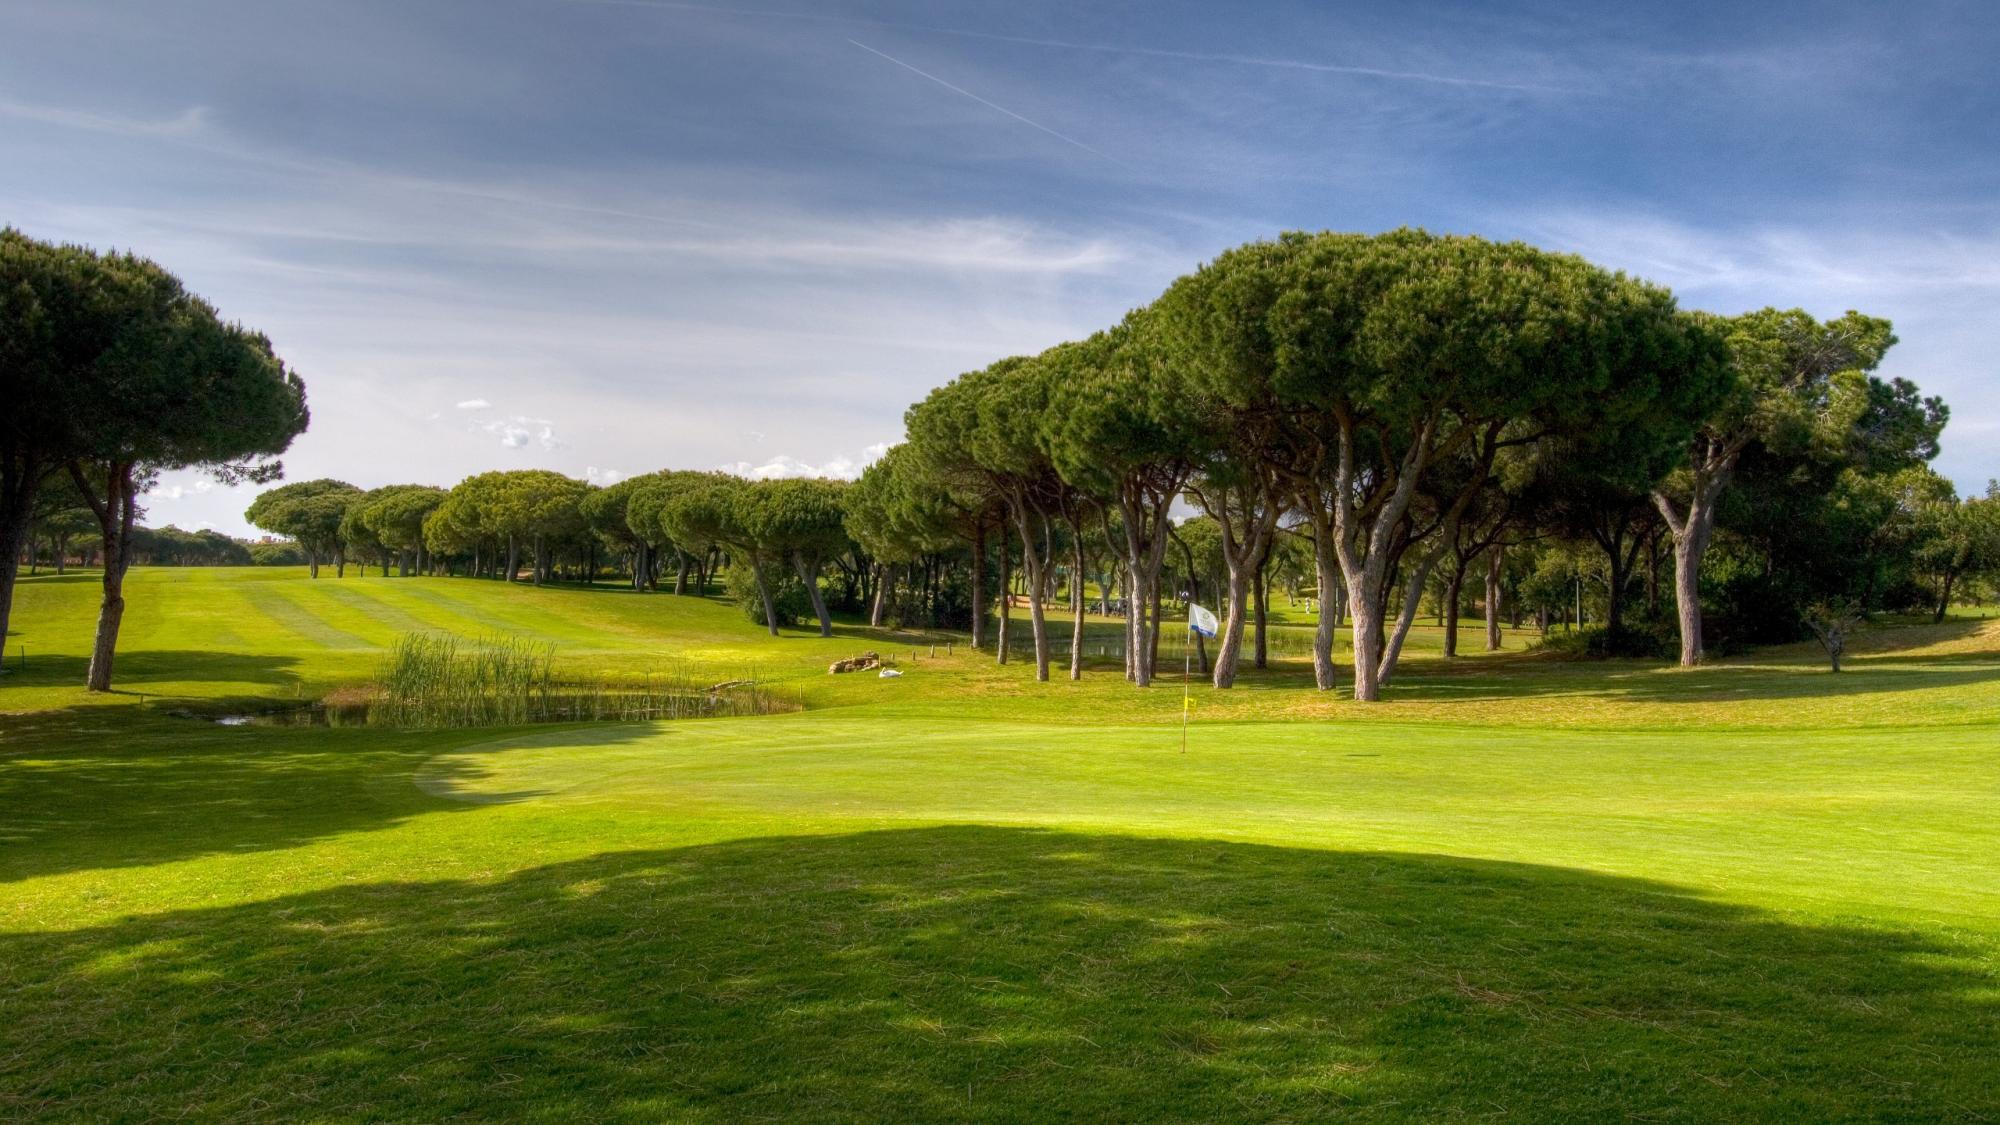 The Vilasol Golf Course - 27 Holes's lovely golf course situated in vibrant Algarve.